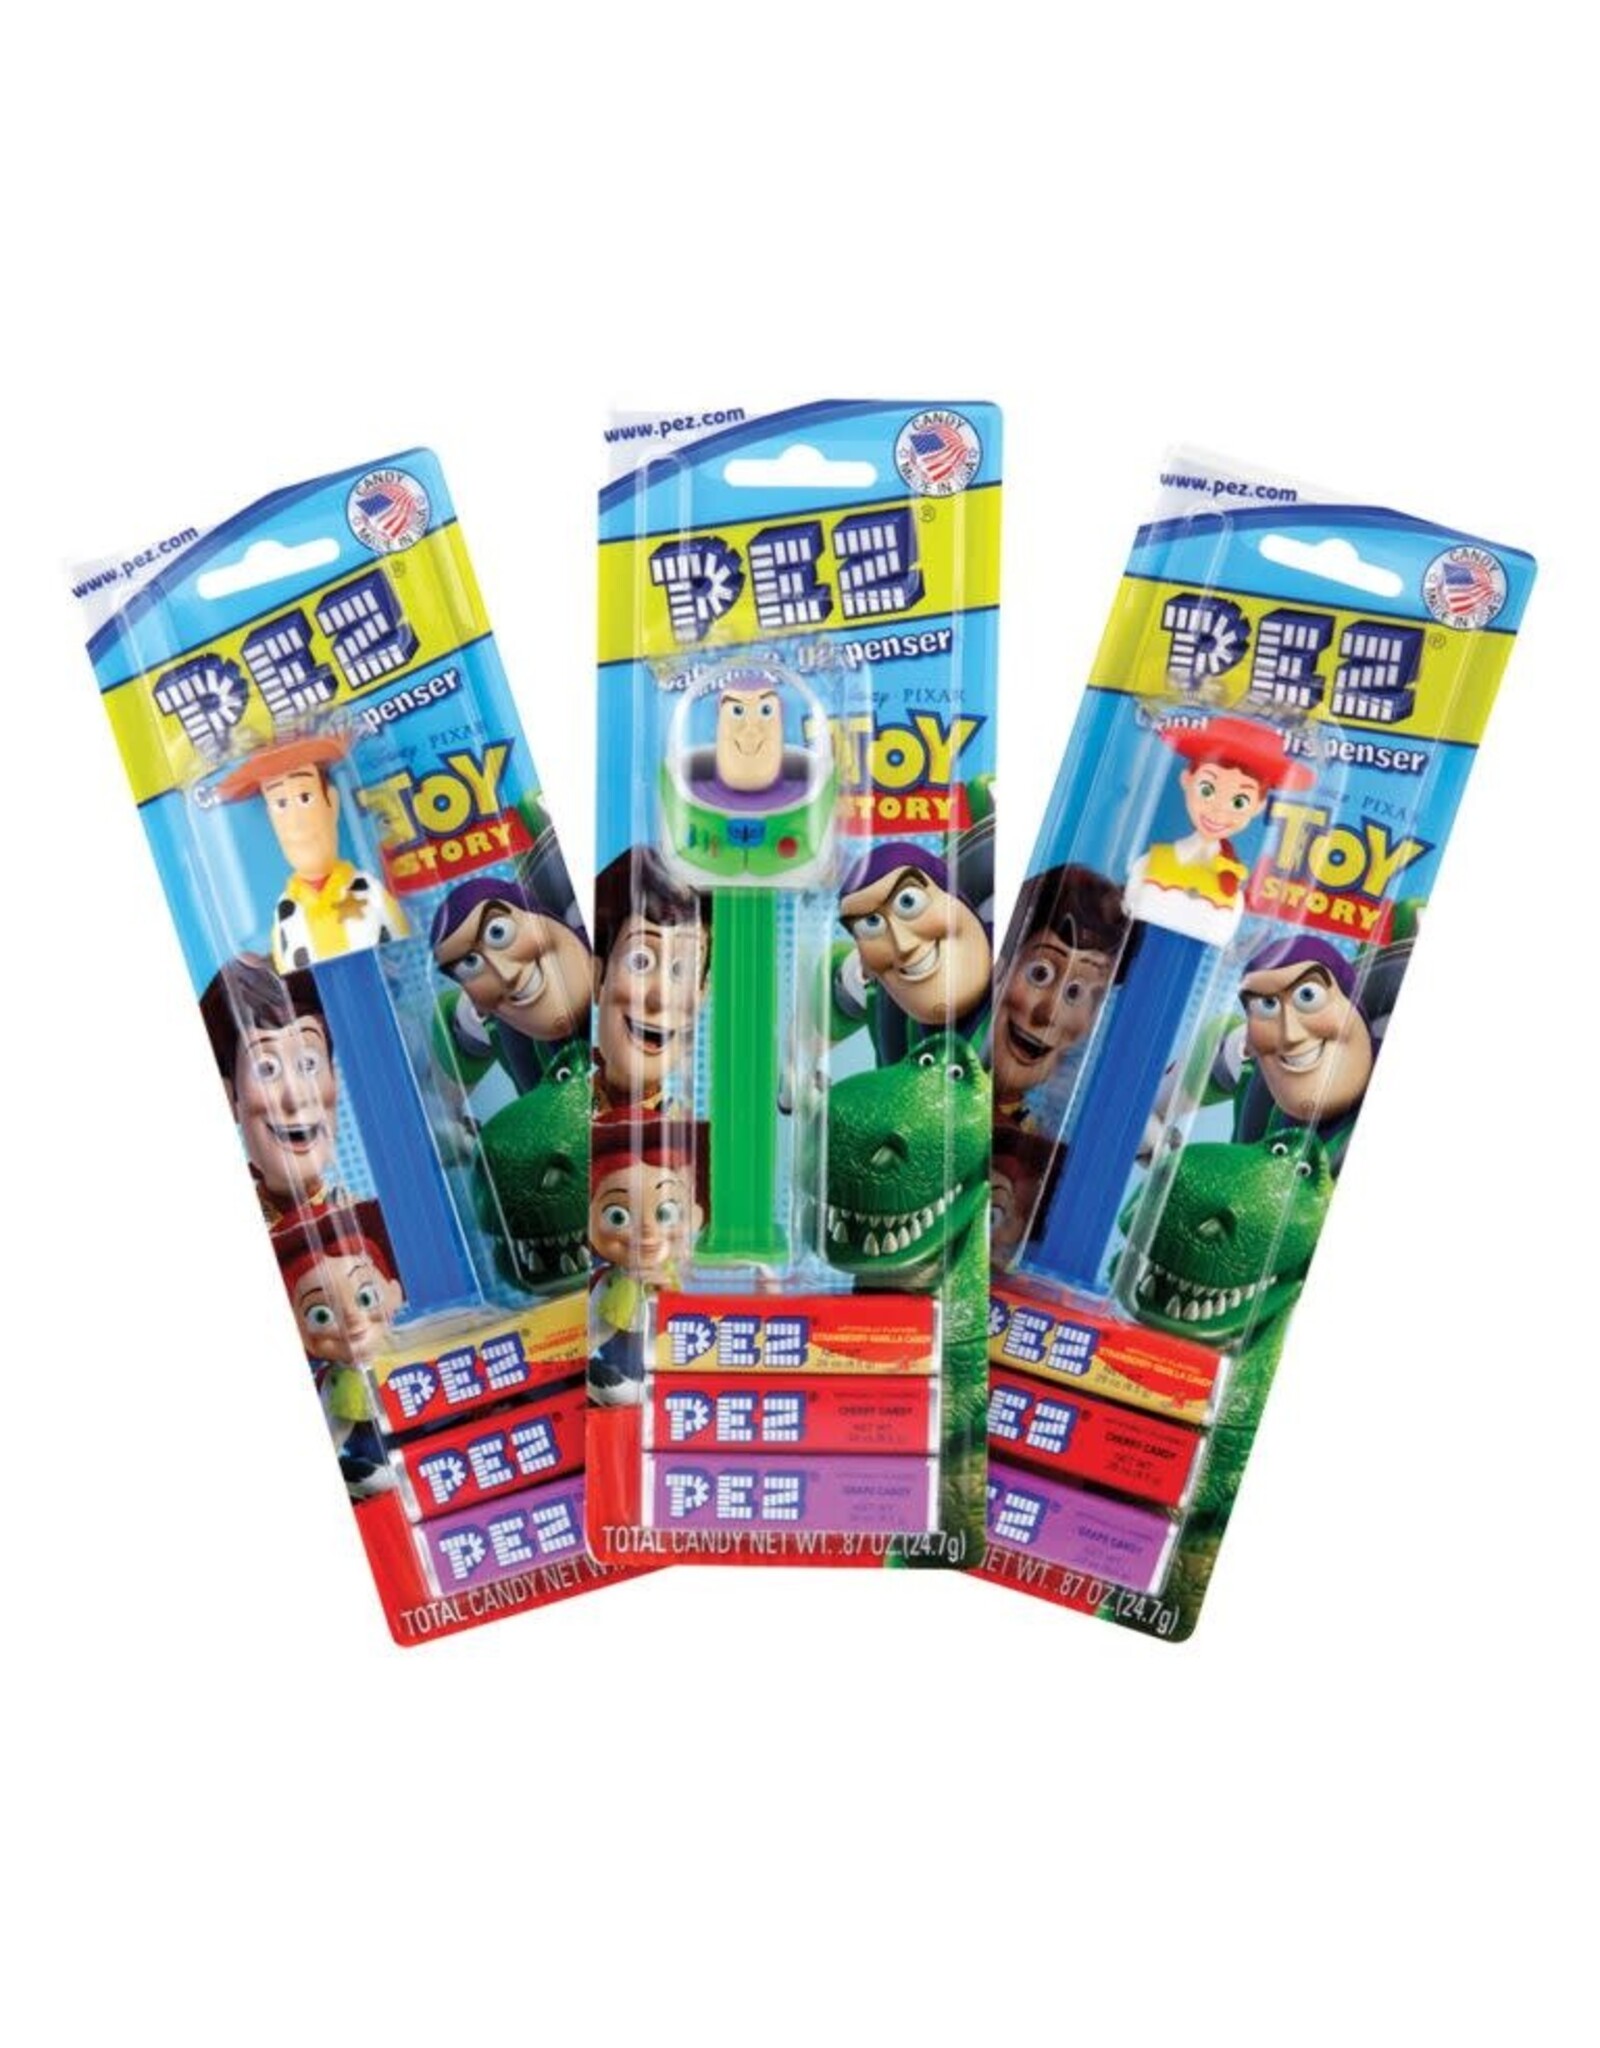 PEZ Dispenser Toy Story Assorted